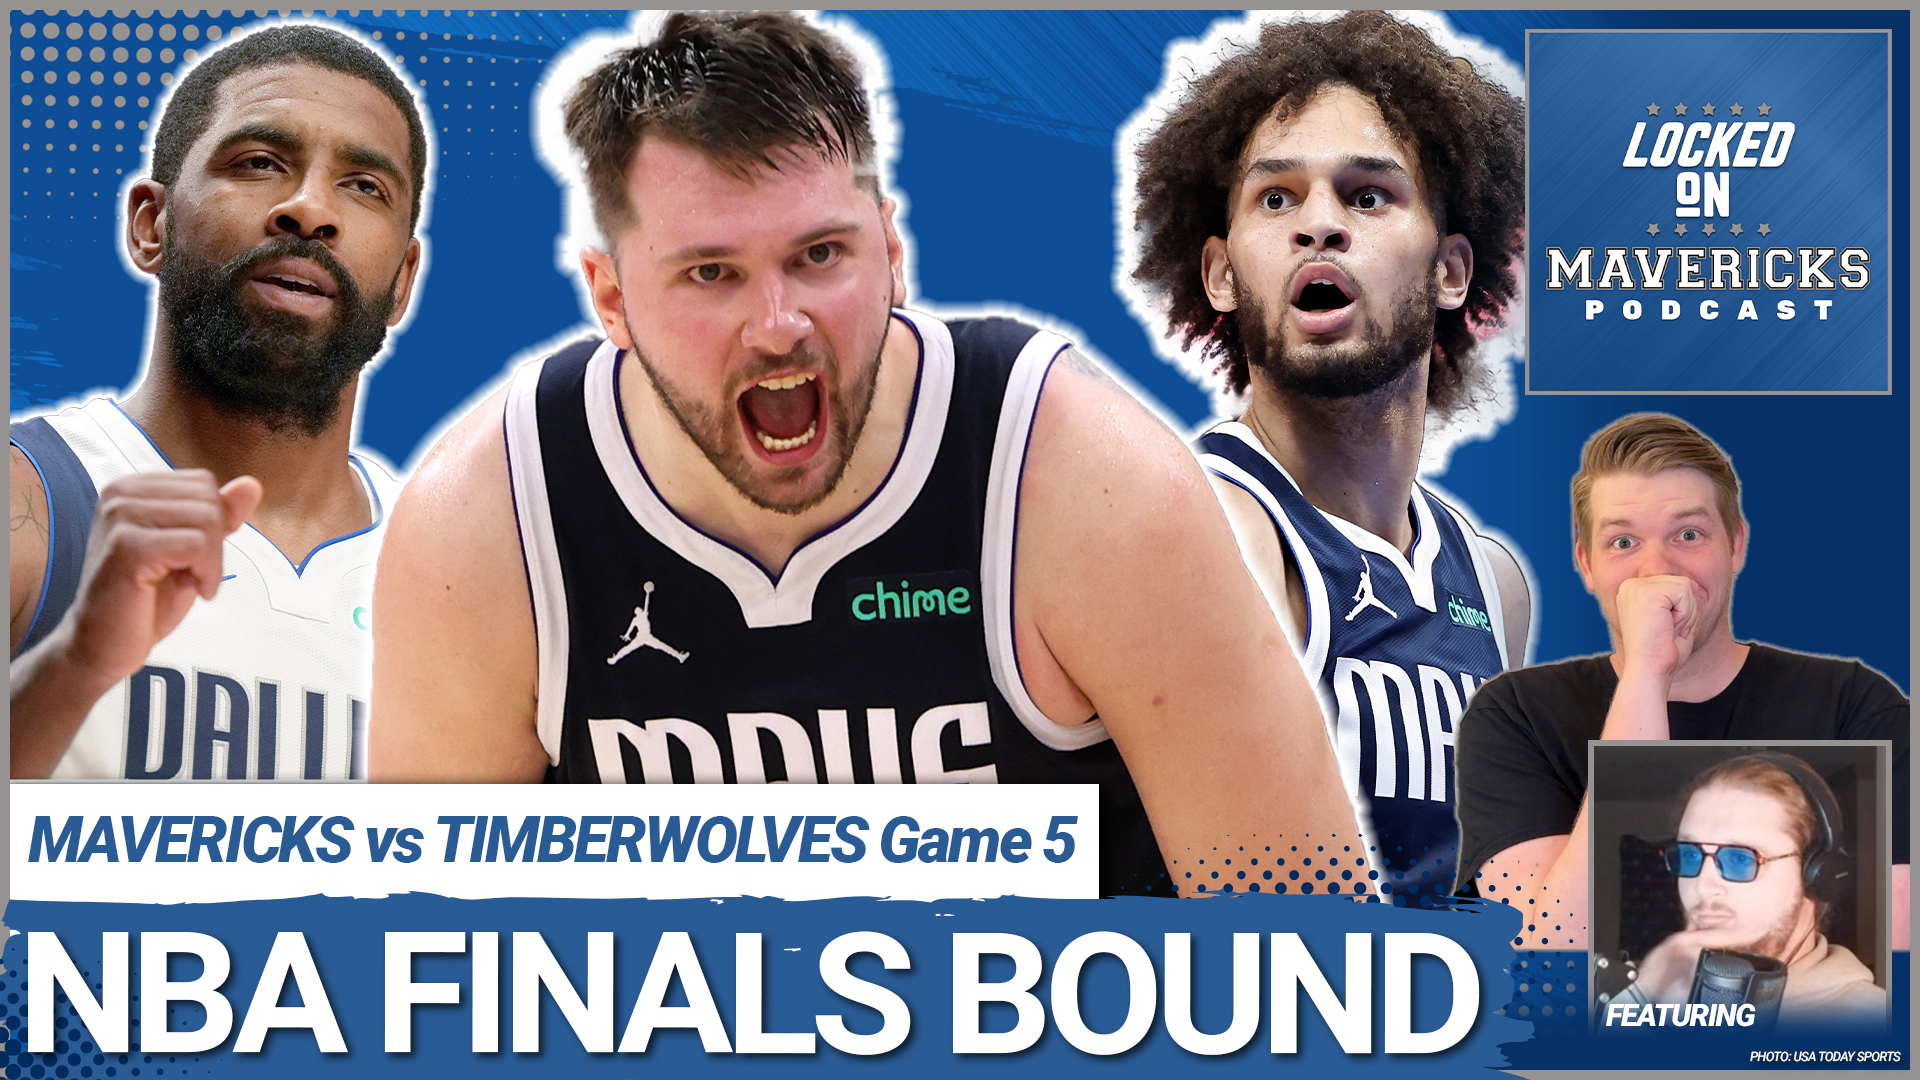 Nick Angstadt & Slightly Biased breakdown why the Dallas Mavericks are going back to the NBA Finals behind the play of Luka Doncic & Kyrie Irving.